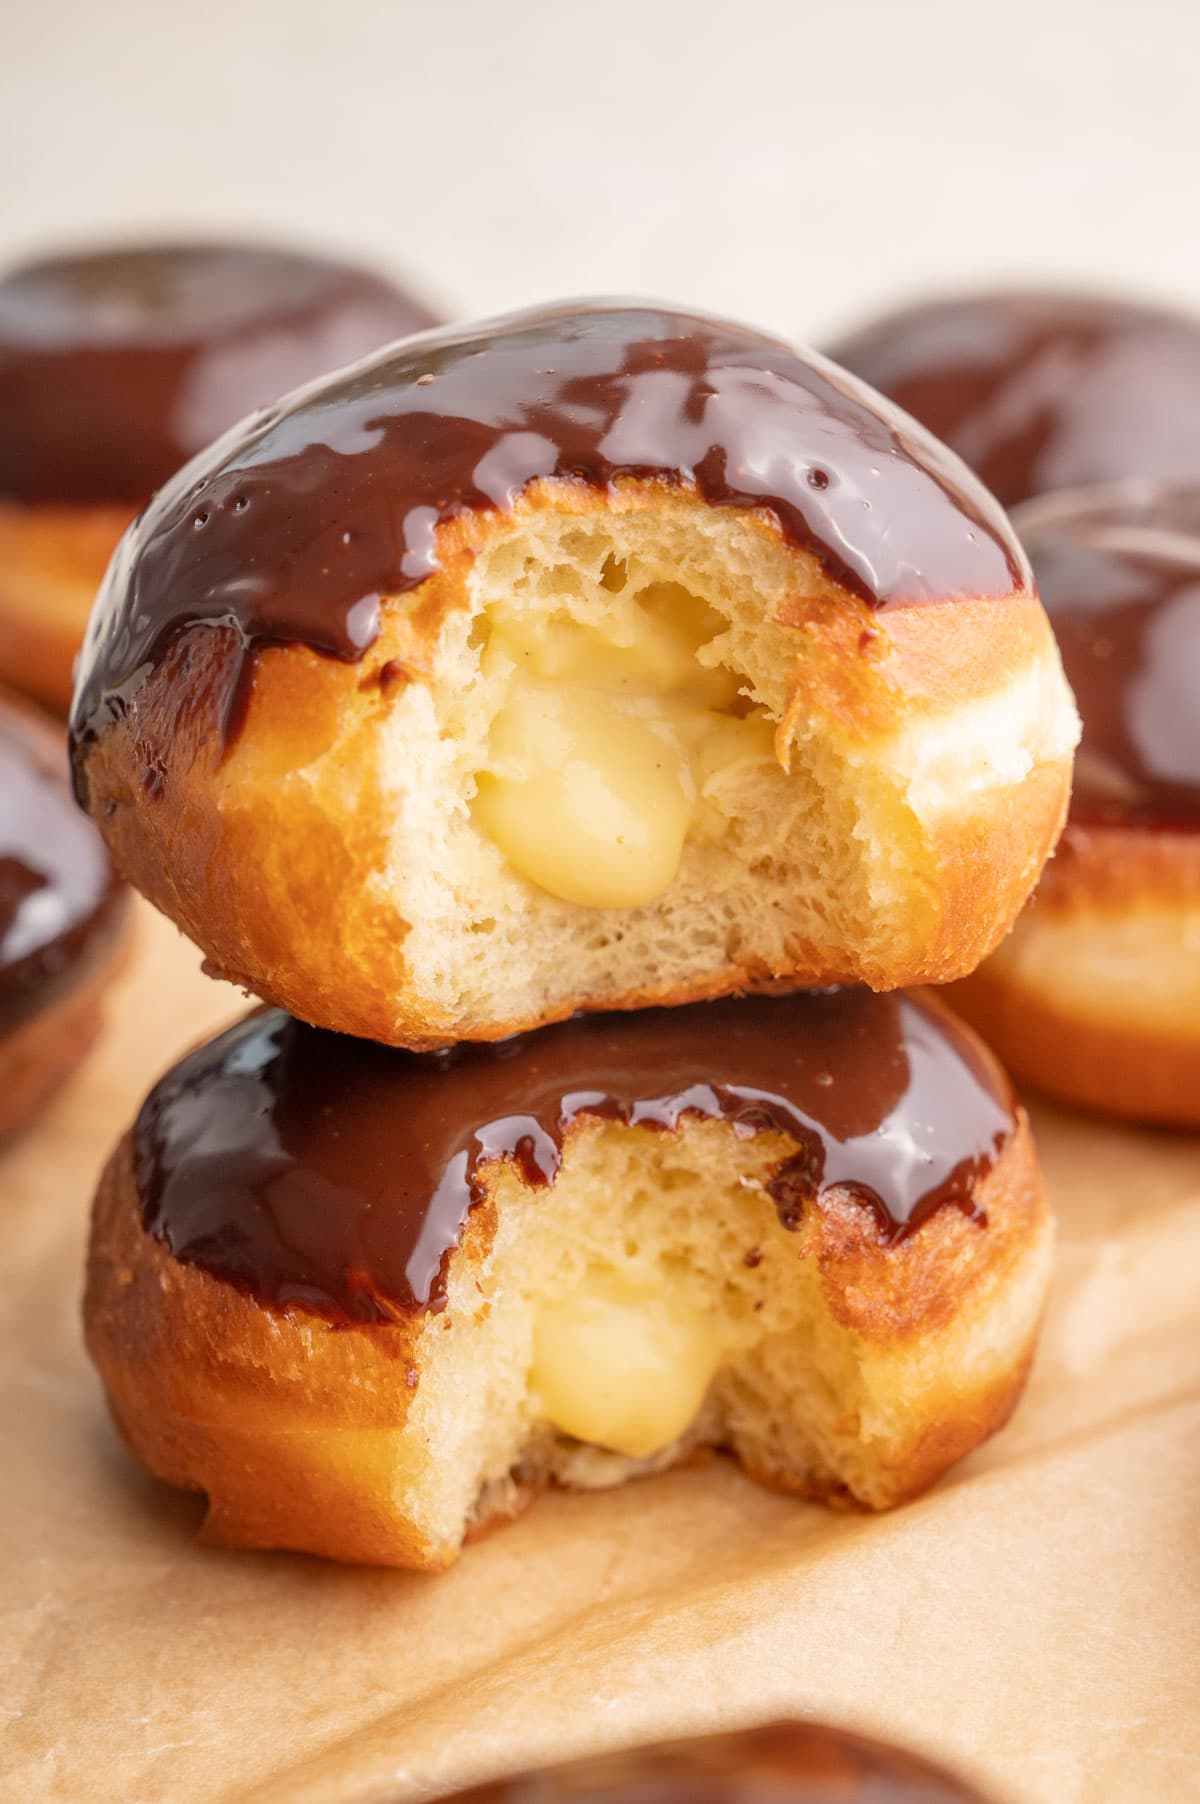 Two Boston cream donuts with a piece bitten off stack on each other.